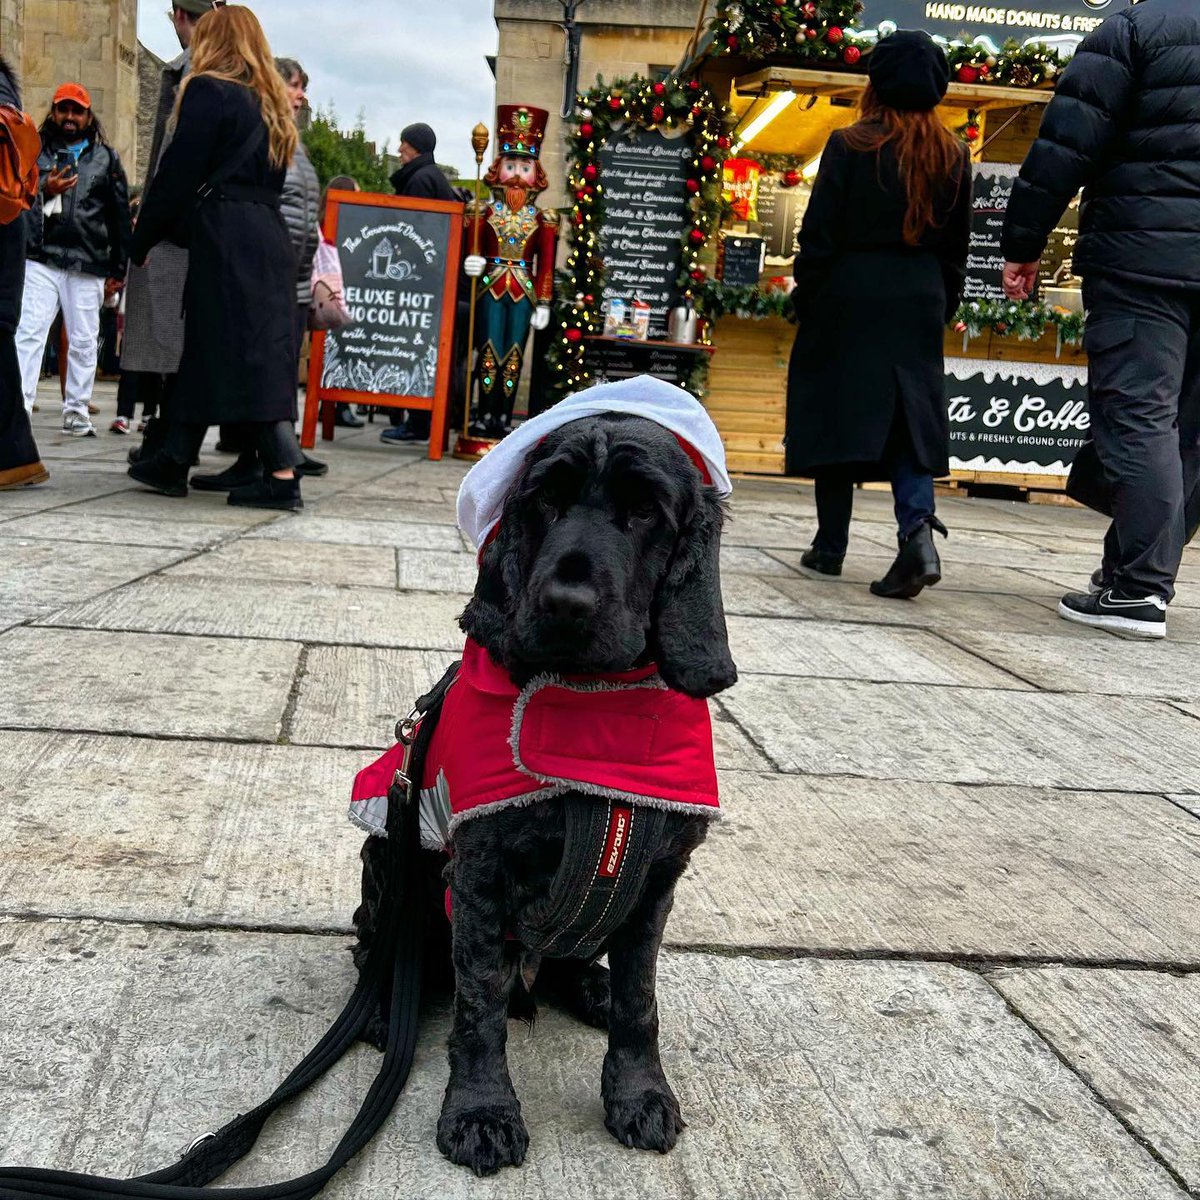 We love seeing so many good boys and girls around the market. However, we are expecting the next few weekends to be extremely busy so we would strongly advise leaving dogs at home if you can, or bring them along in the mid-week when it tends to be a bit quieter.